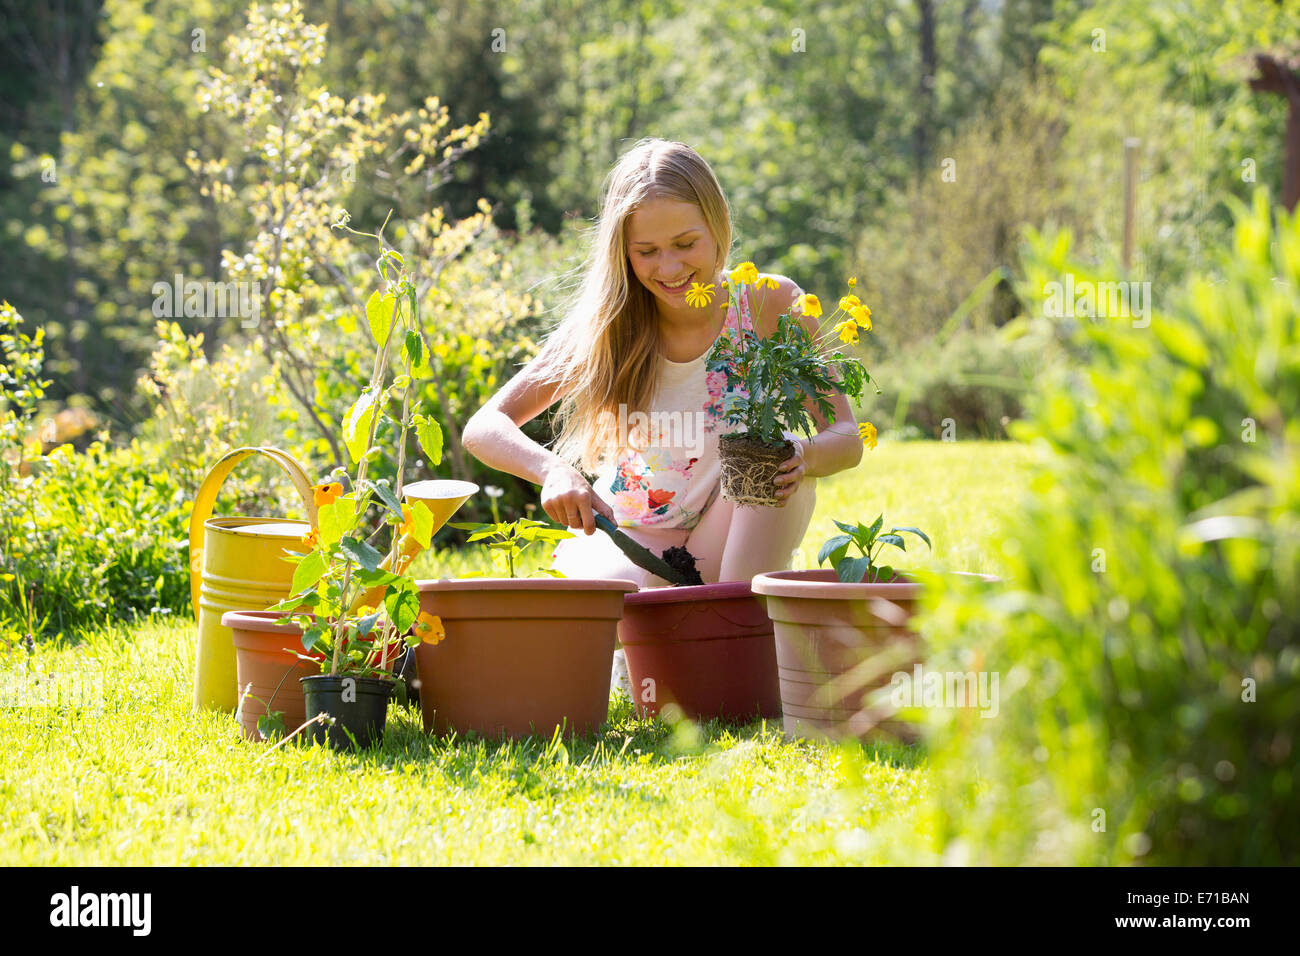 Smiling teenage girl repotting plants in the garden Stock Photo